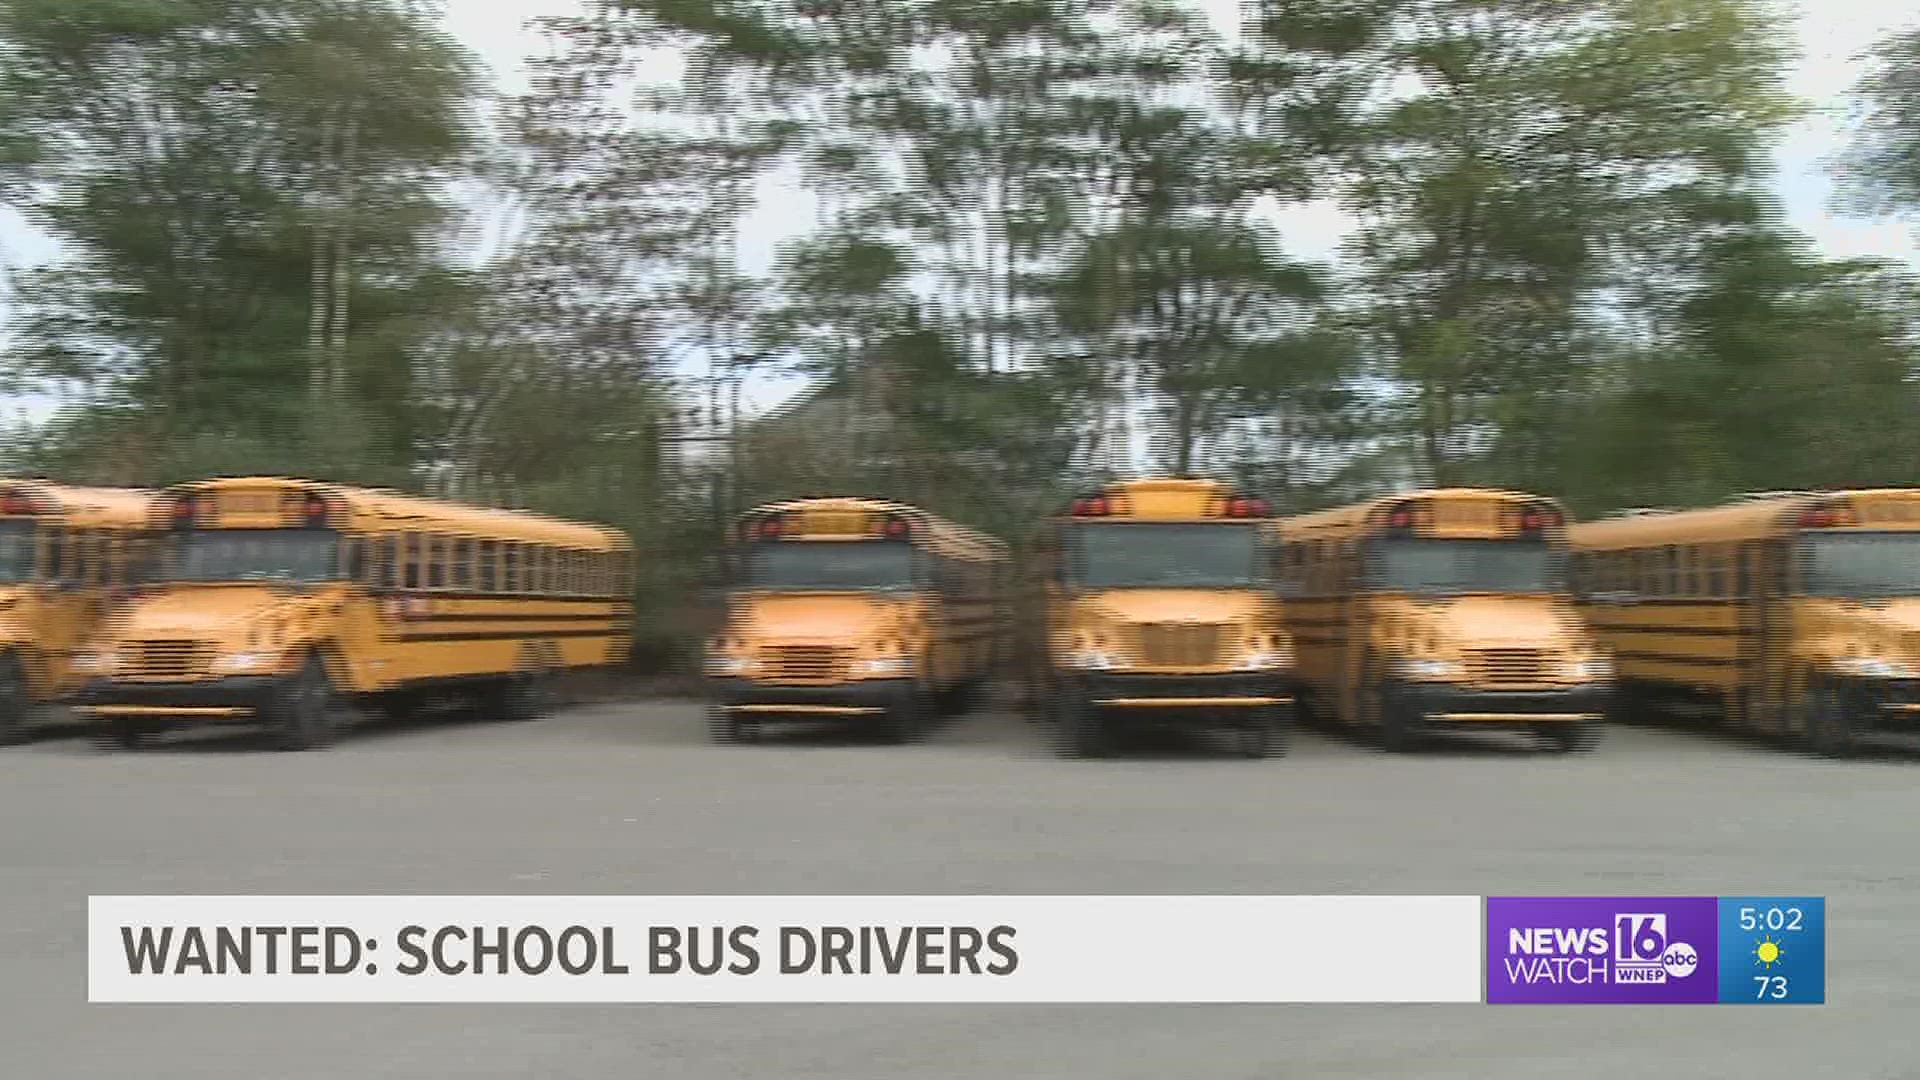 The Pennsylvania Department of Education is hoping to fill the bus drivers' seats with licensed drivers.